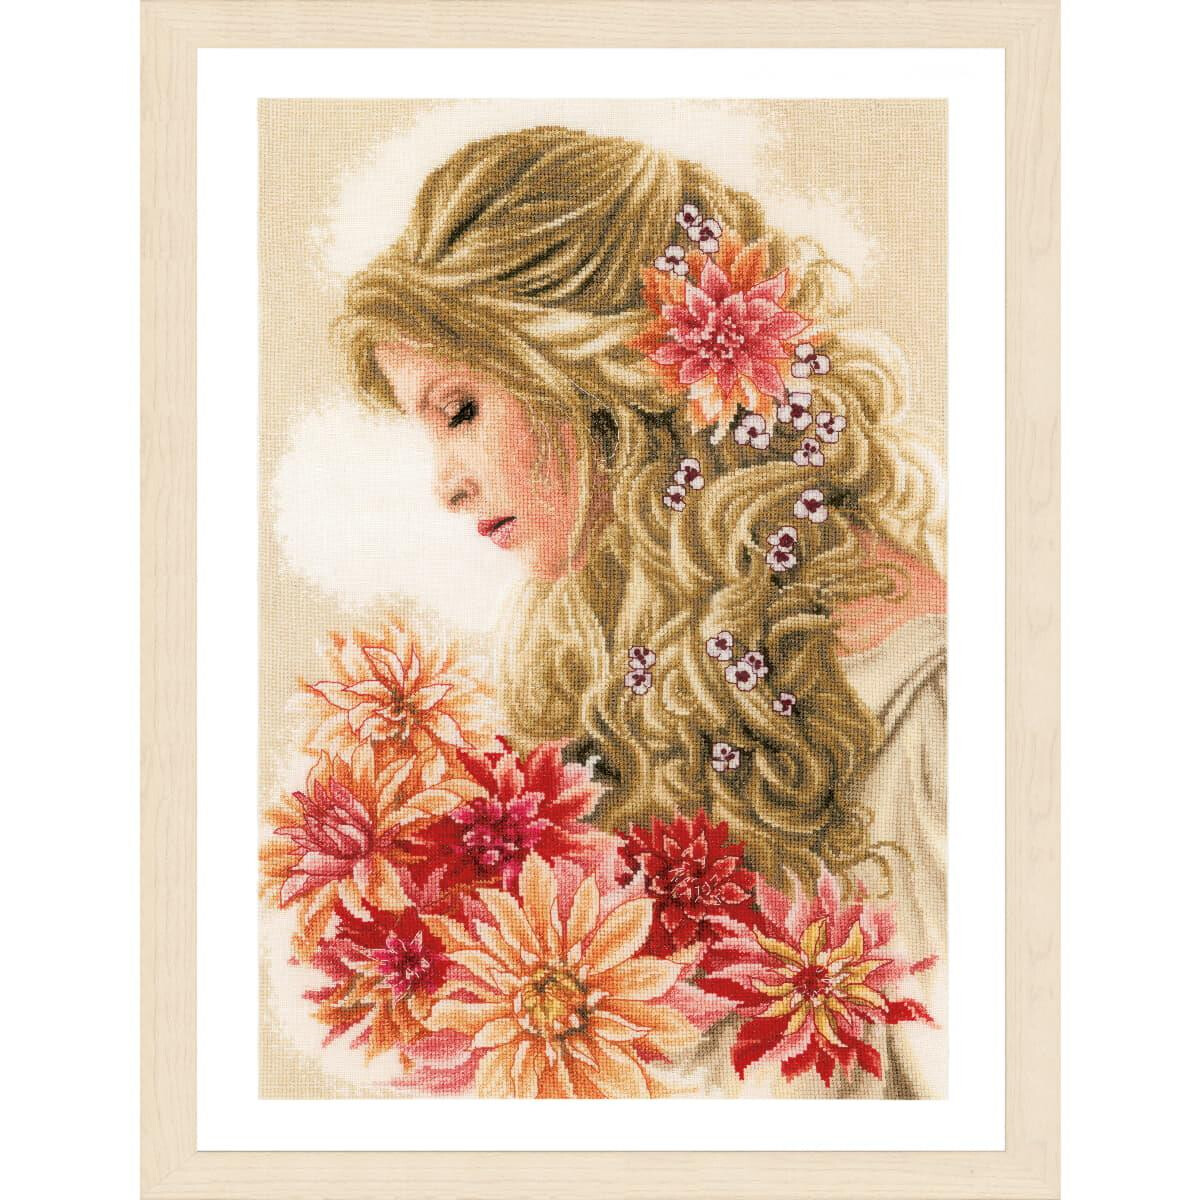 A framed painting shows a woman with long, wavy hair...